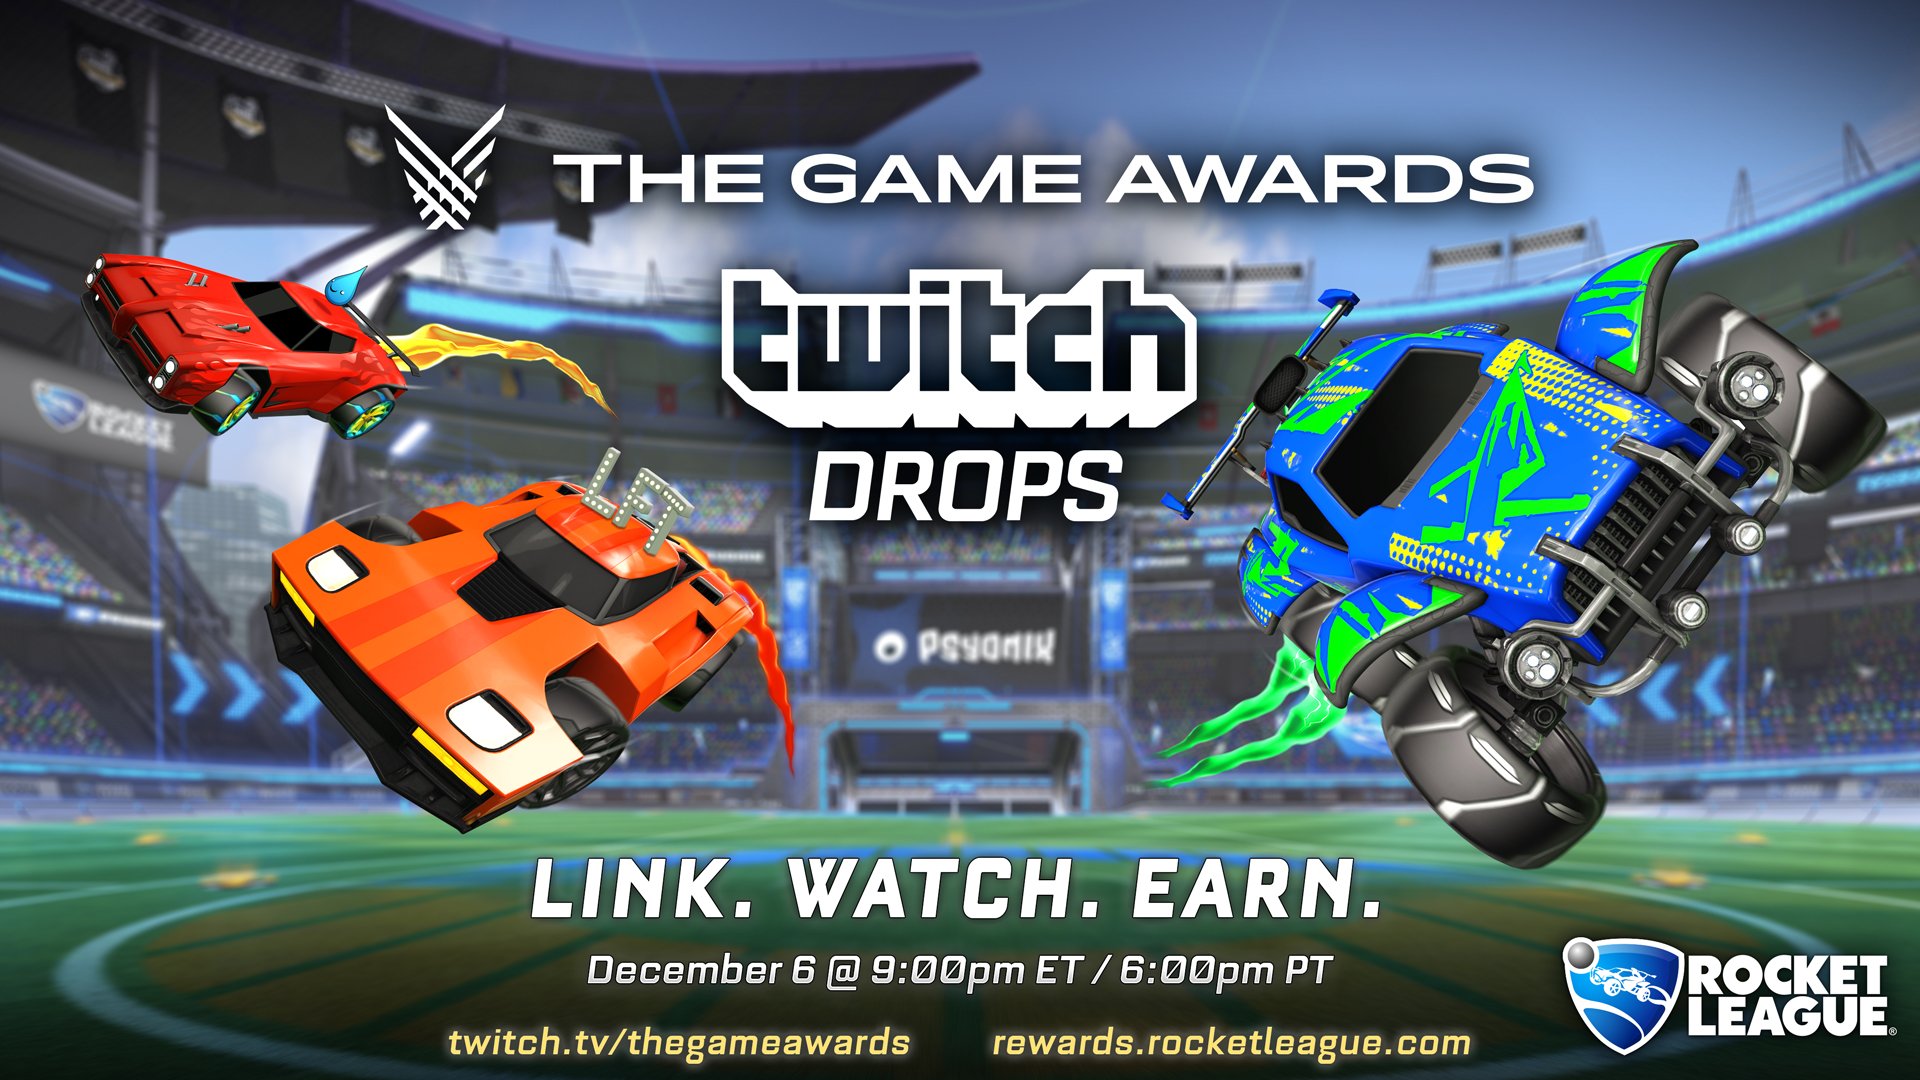 Rocket League on Twitter: "Link! Watch! Earn! We're the 2018 #RLCS set #Twitch Drops (aka Fan Rewards) to the official stream tomorrow at 9 PM ET 6 PM